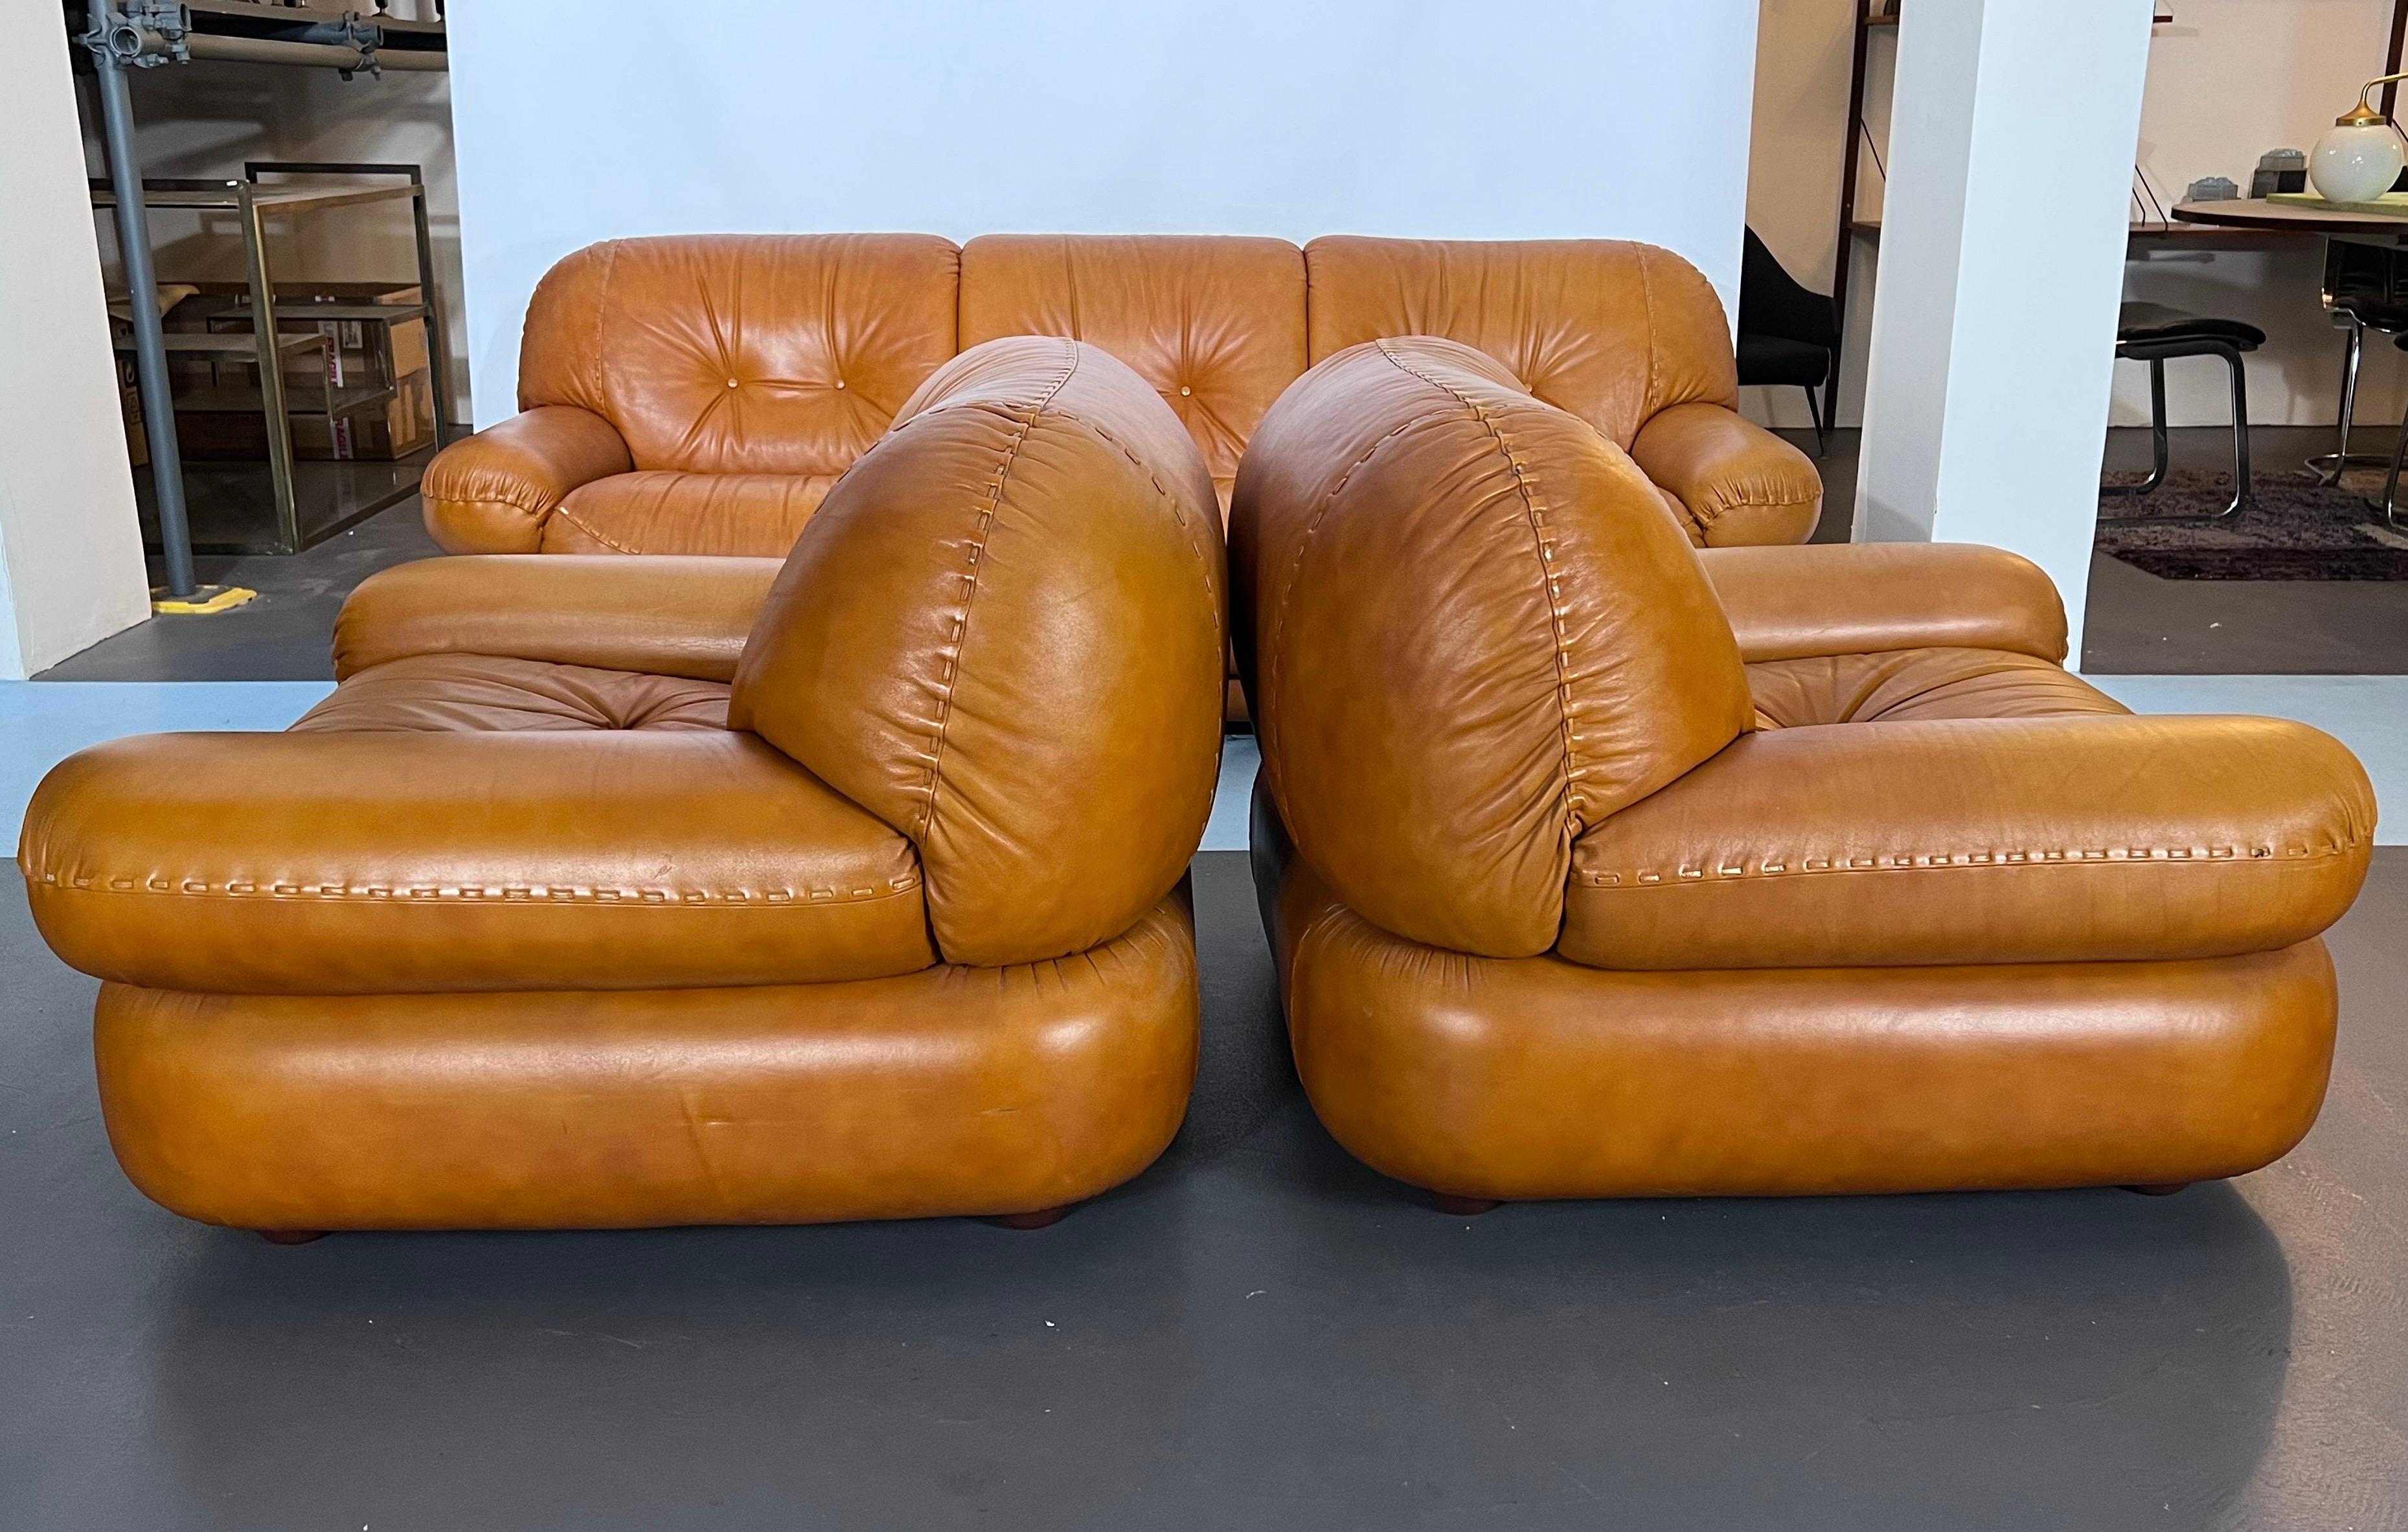 Vintage Sofa Set in Cognac Leather by Sapporo for Mobil Girgi, Italy, 1970s For Sale 3